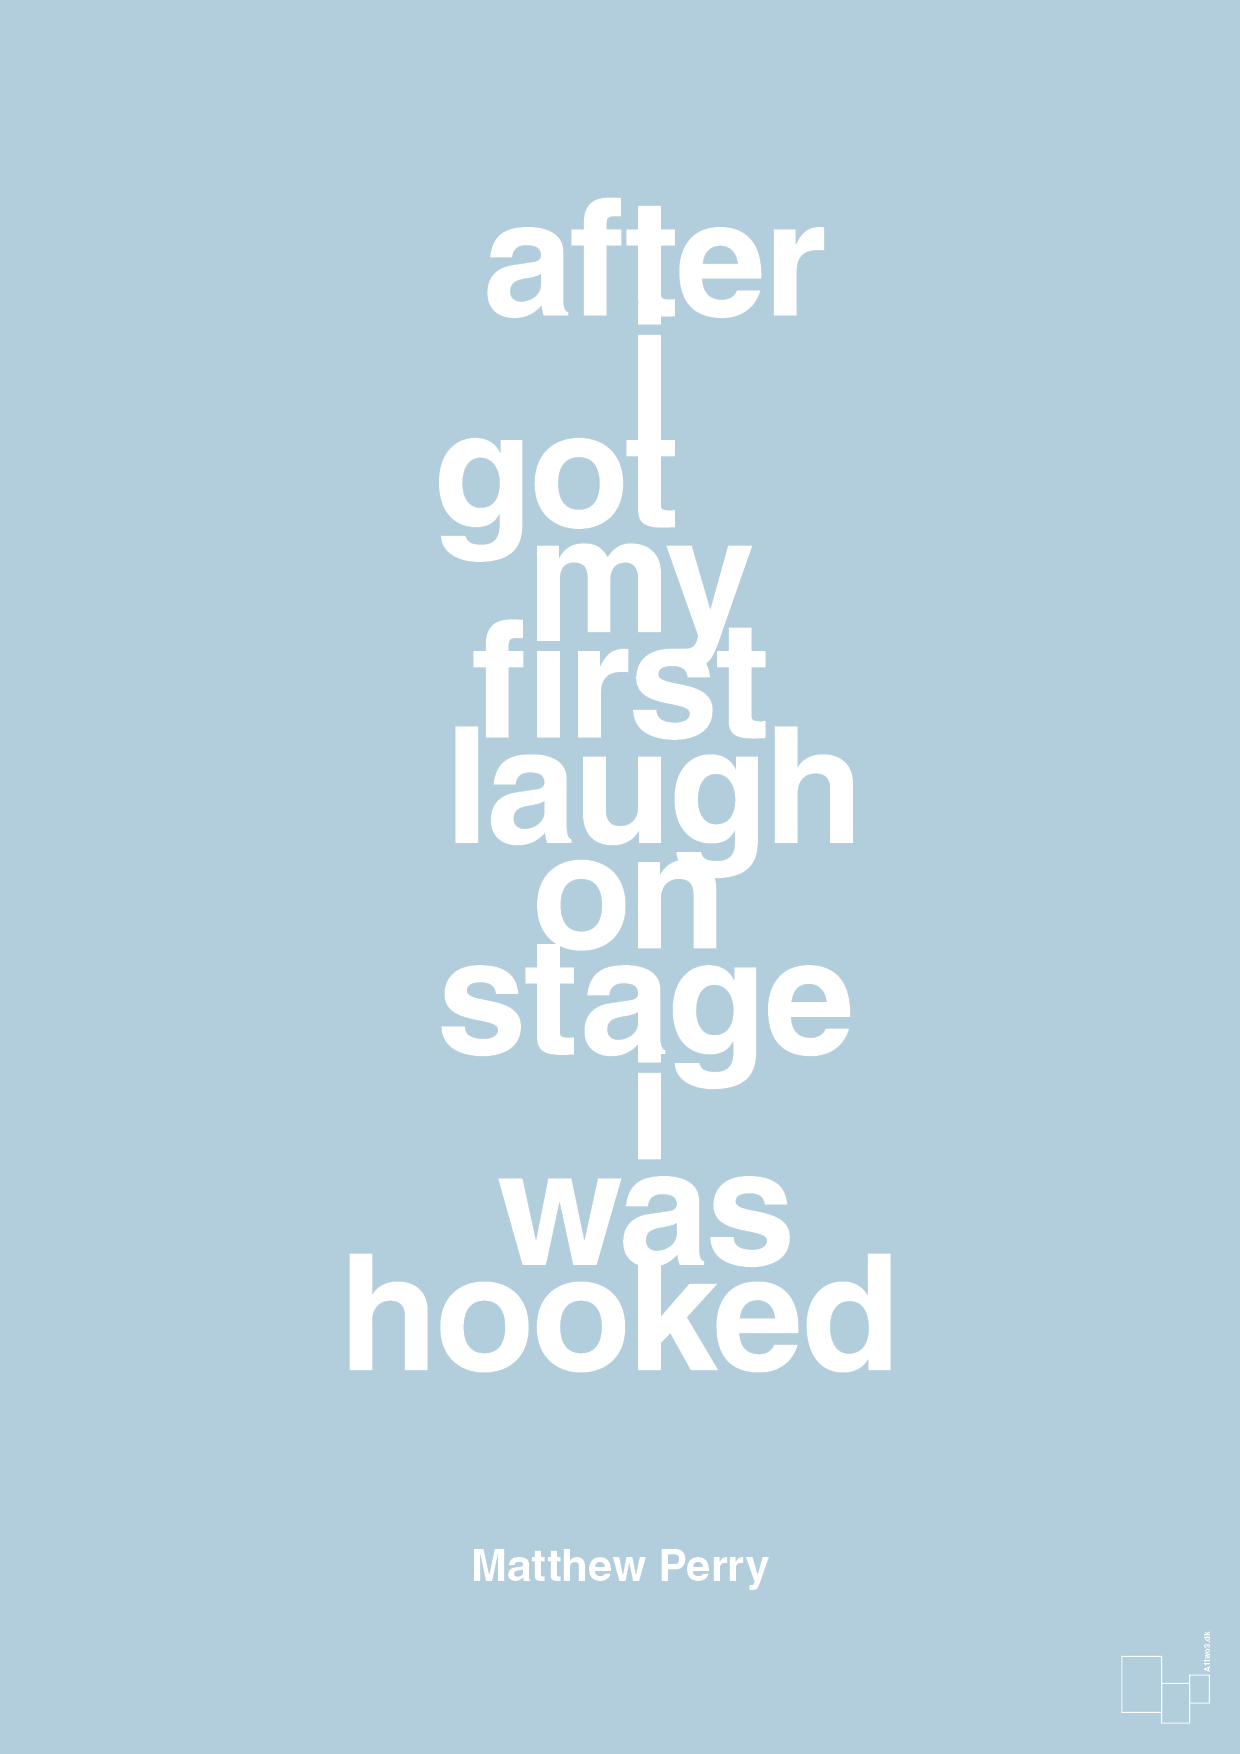 after i got my first laugh on stage i was hooked - Plakat med Citater i Heavenly Blue